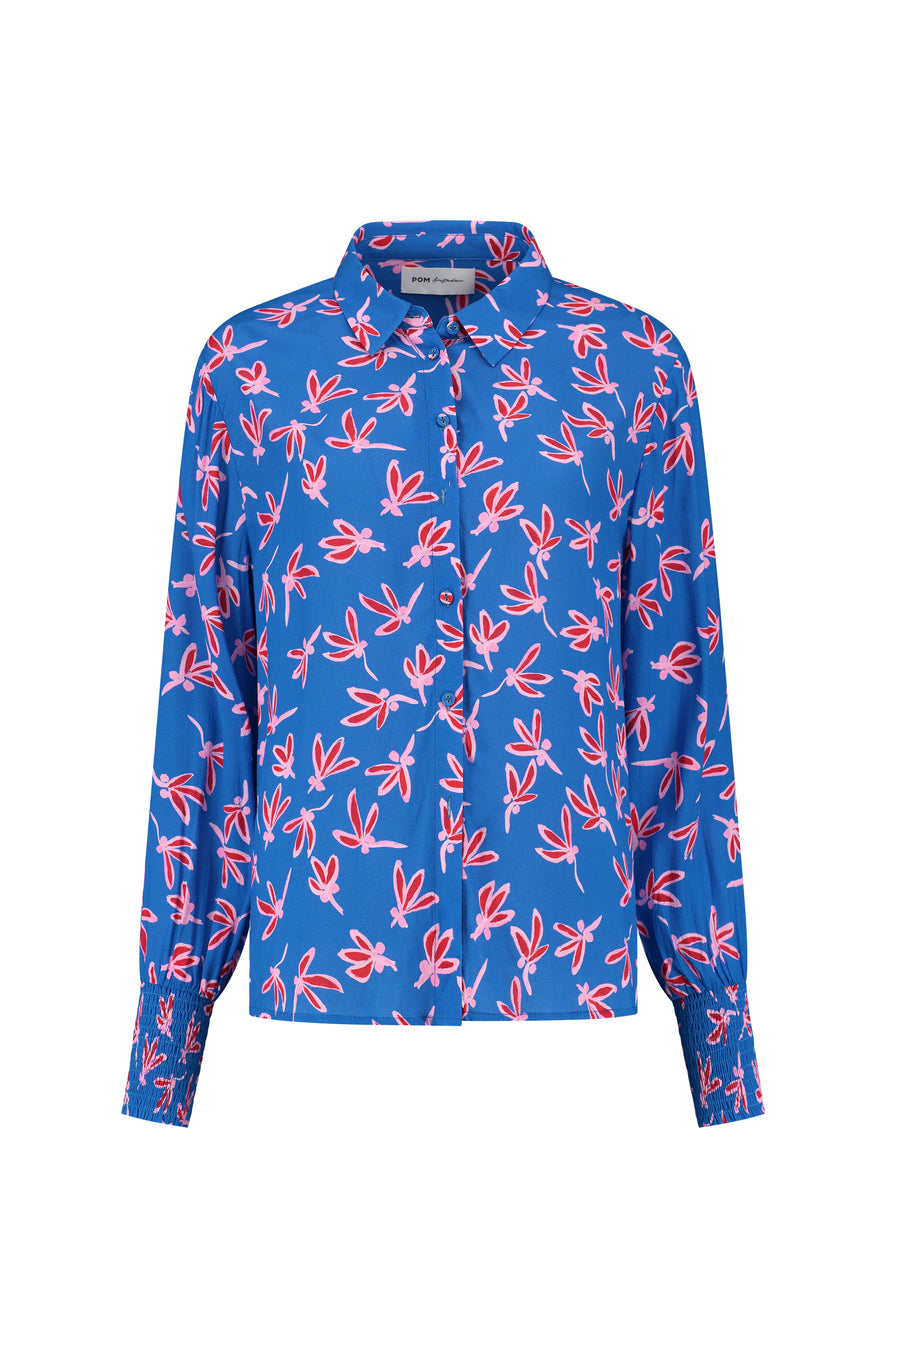 Pom Amsterdam Milly Fly Away Blue Blouse